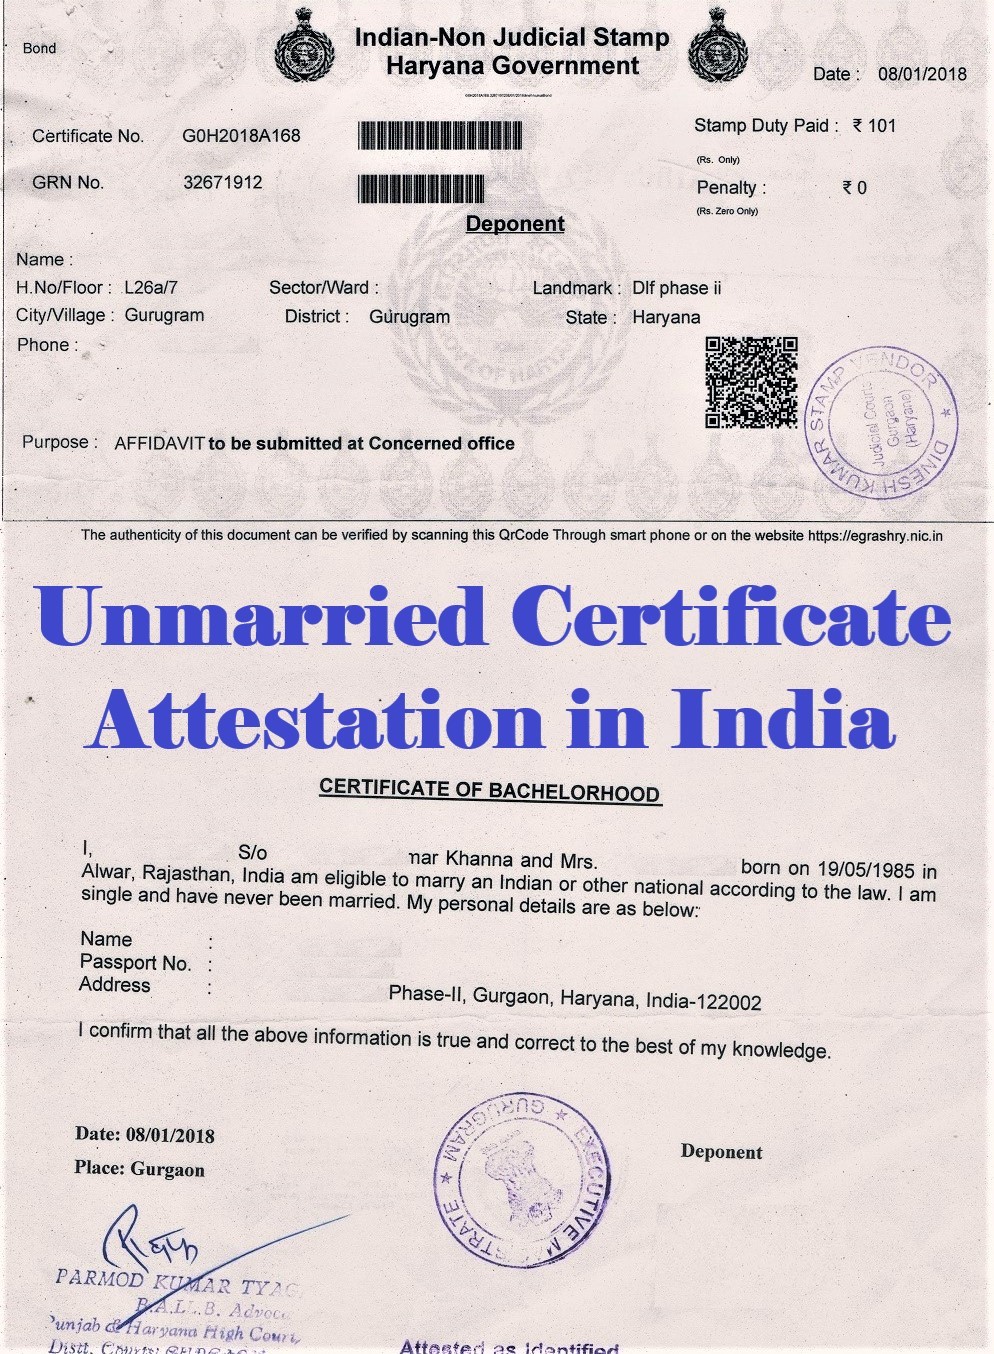 Unmarried Certificate Attestation from Bahrain Embassy